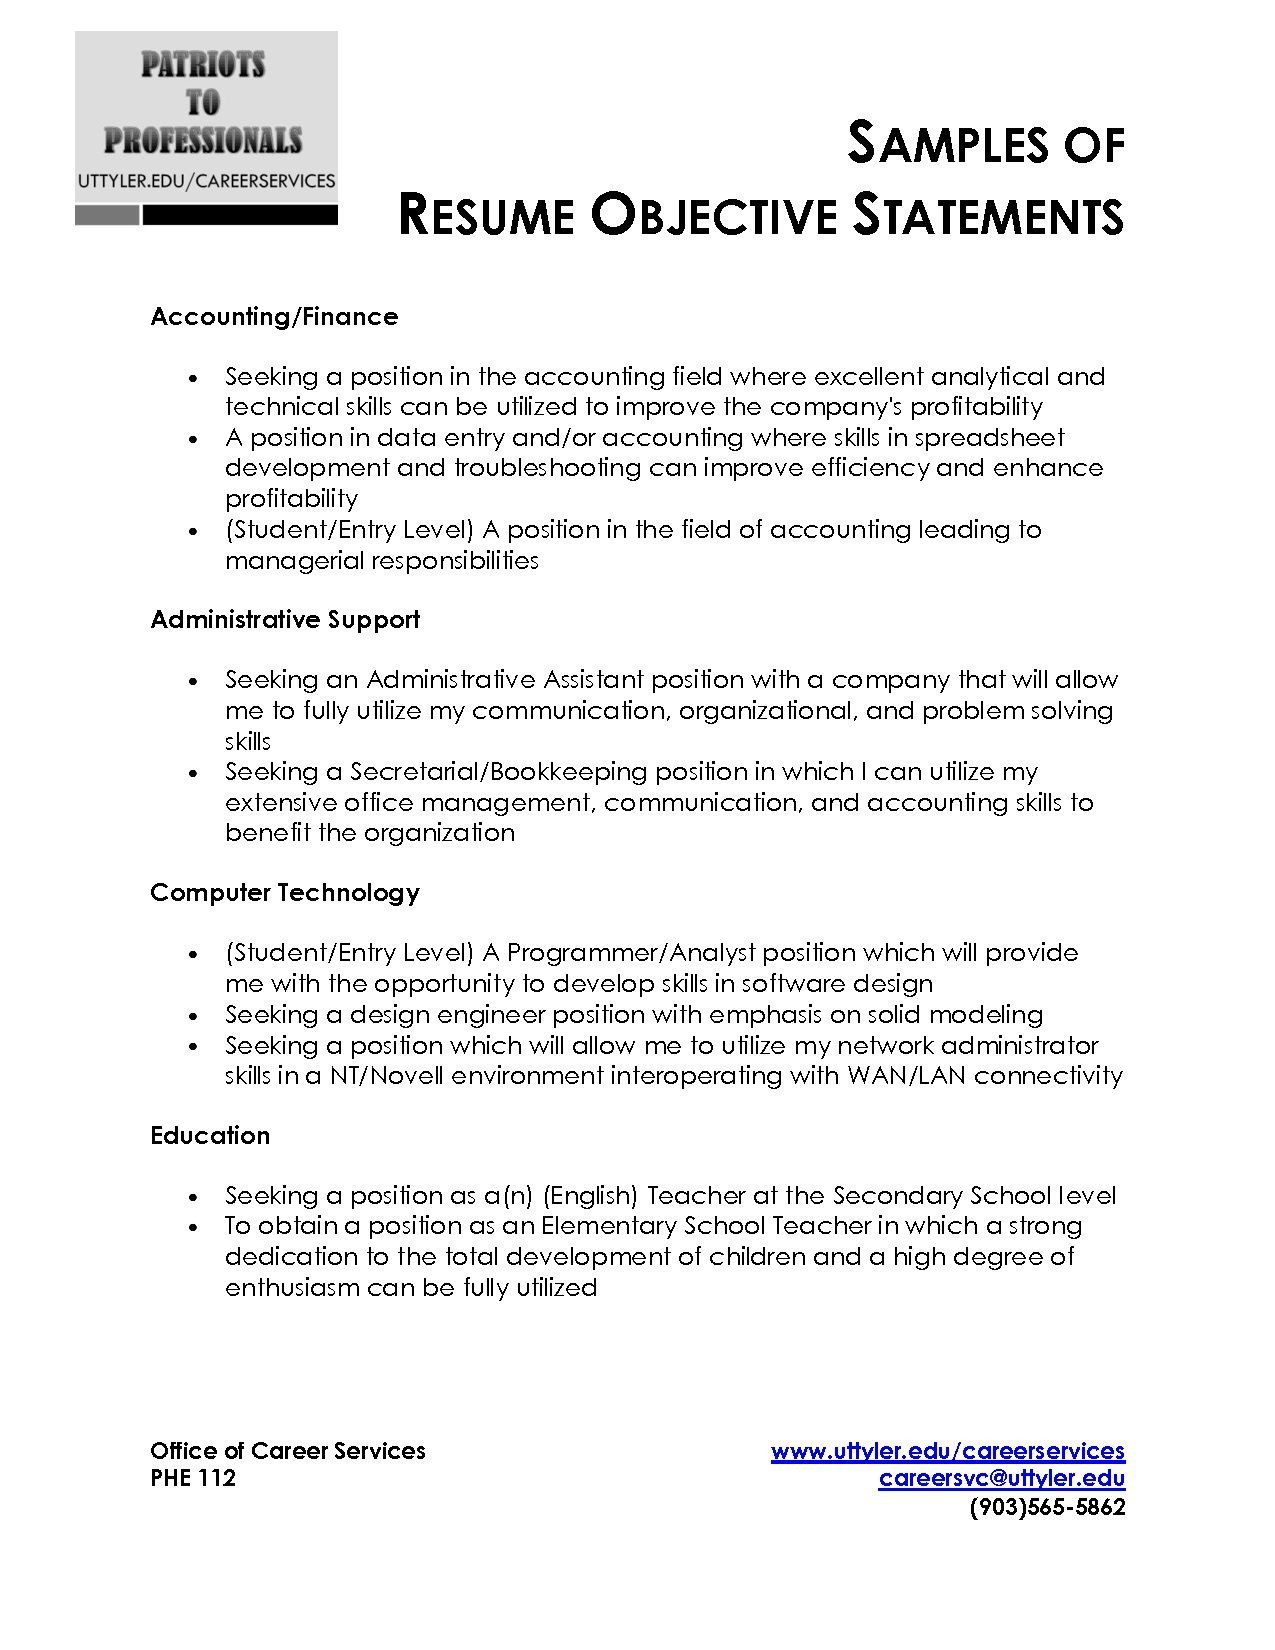 Sample Of A Resume Objective Statement Sample Resume Objective Statement Free Resume Templates Resume …